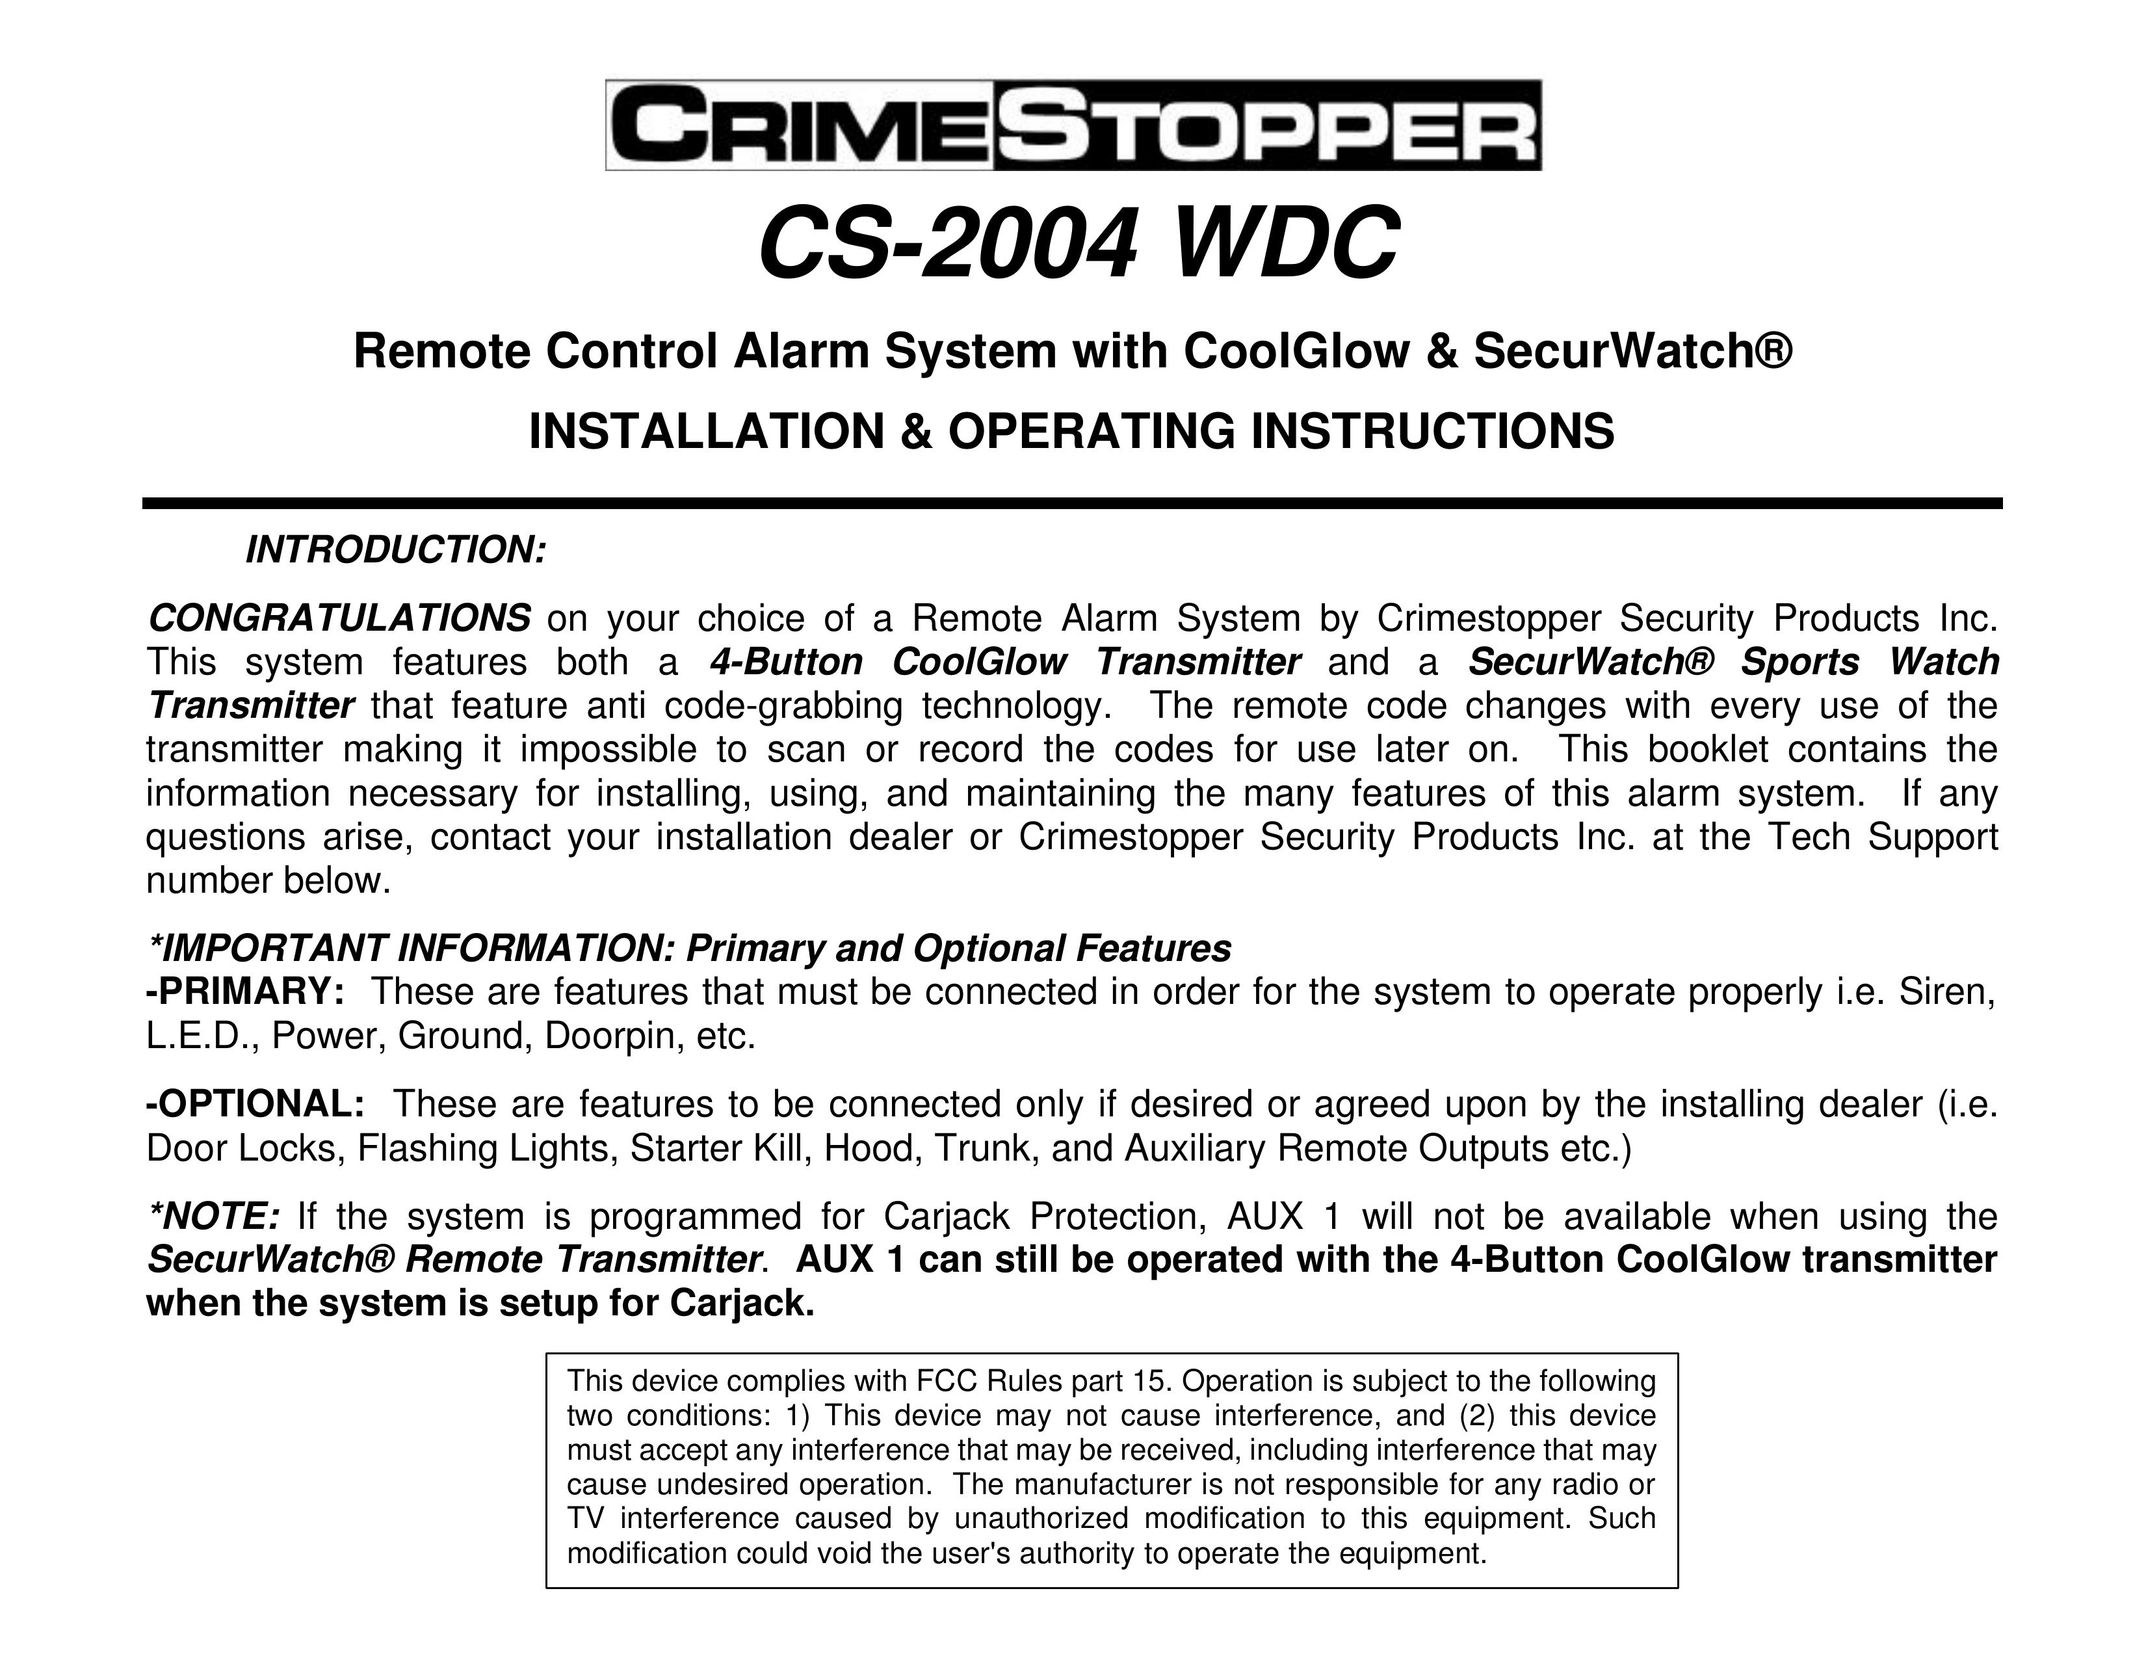 Crimestopper Security Products CS-2004 WDC Home Security System User Manual